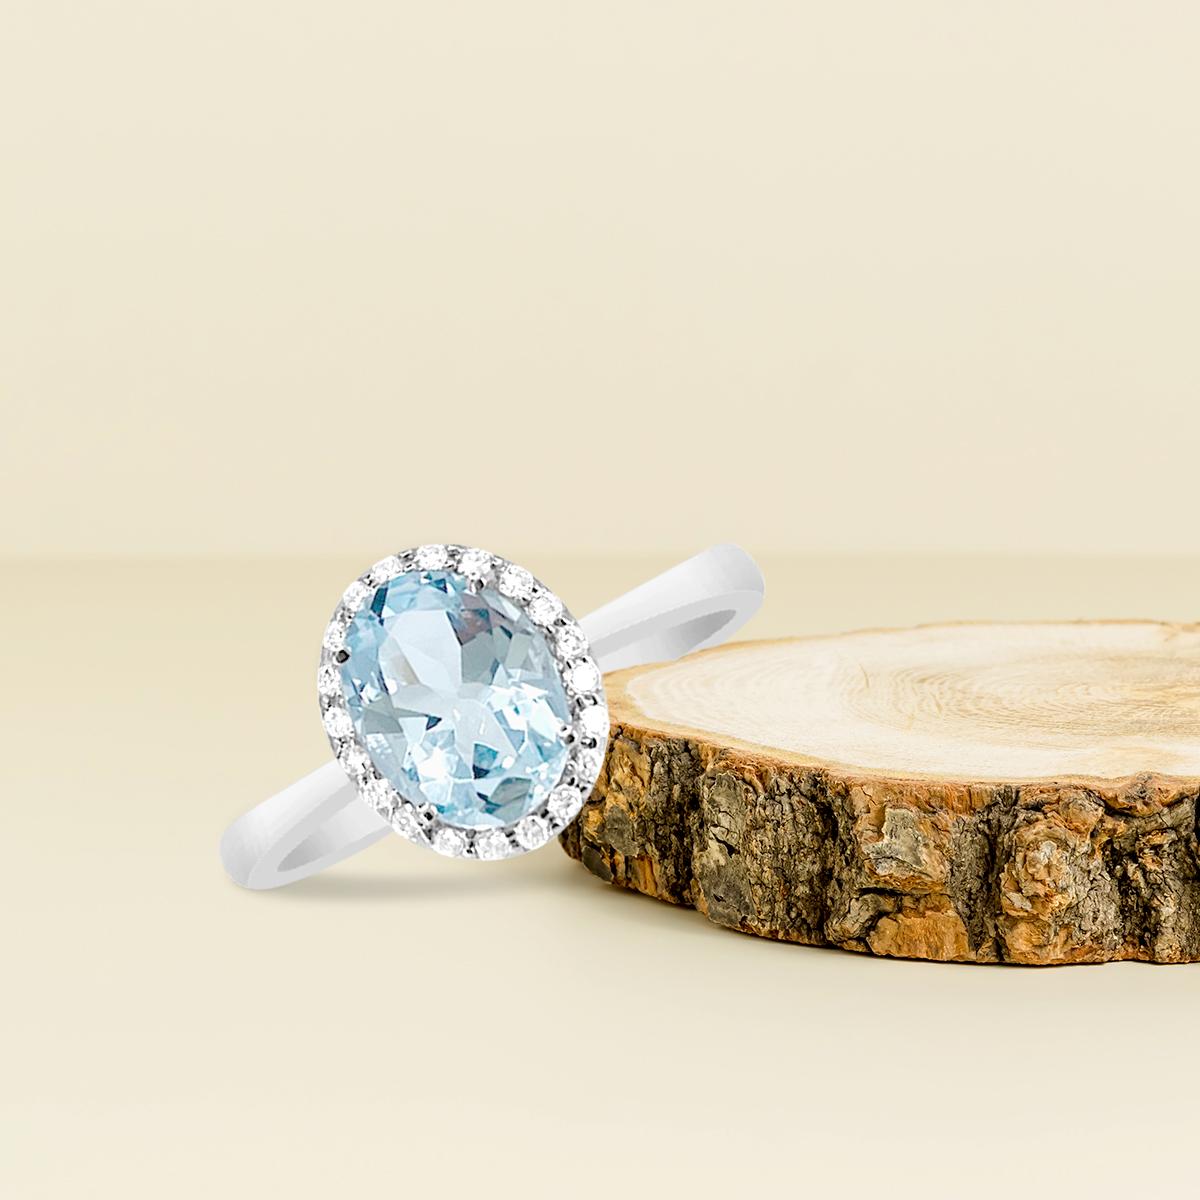 Modern 14K White Gold 1.24cts Aquamarine and Diamond Ring, Style# TS1074AQR 21110/3 For Sale